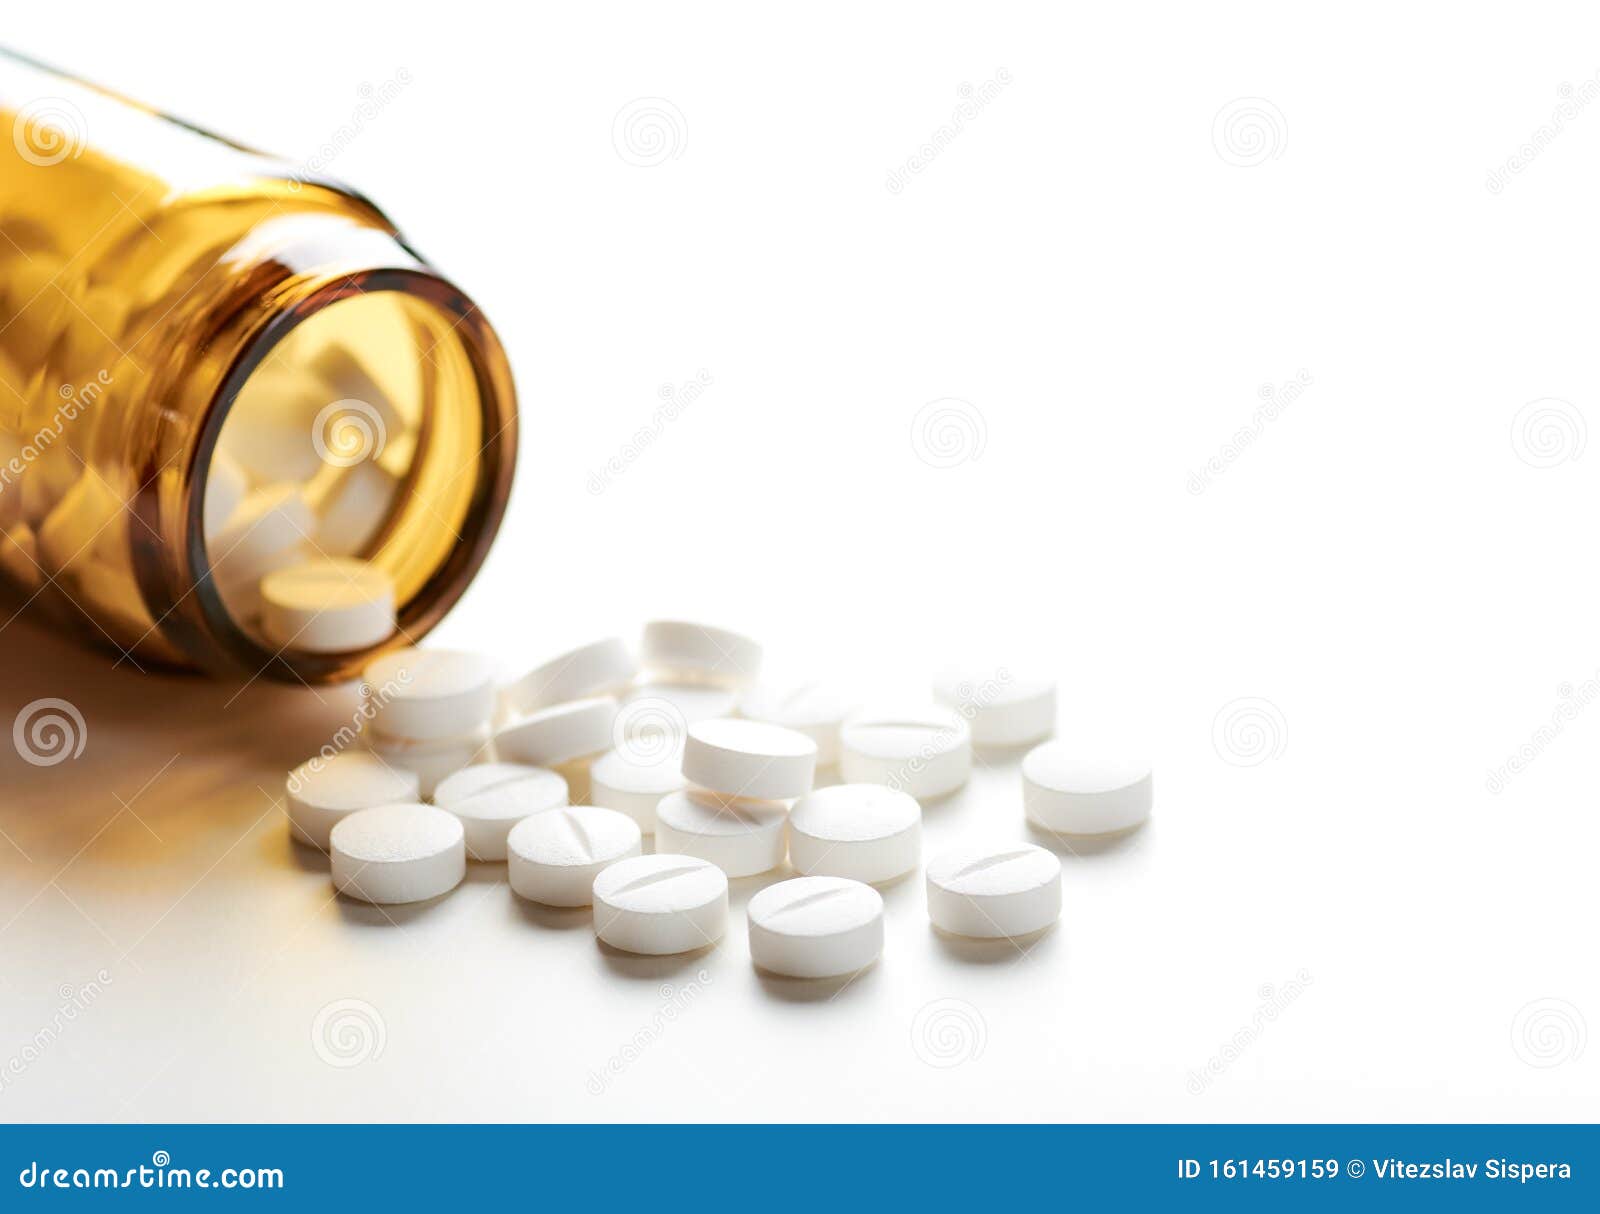 still life with pile of white pills or tablets and glass bottle or glass